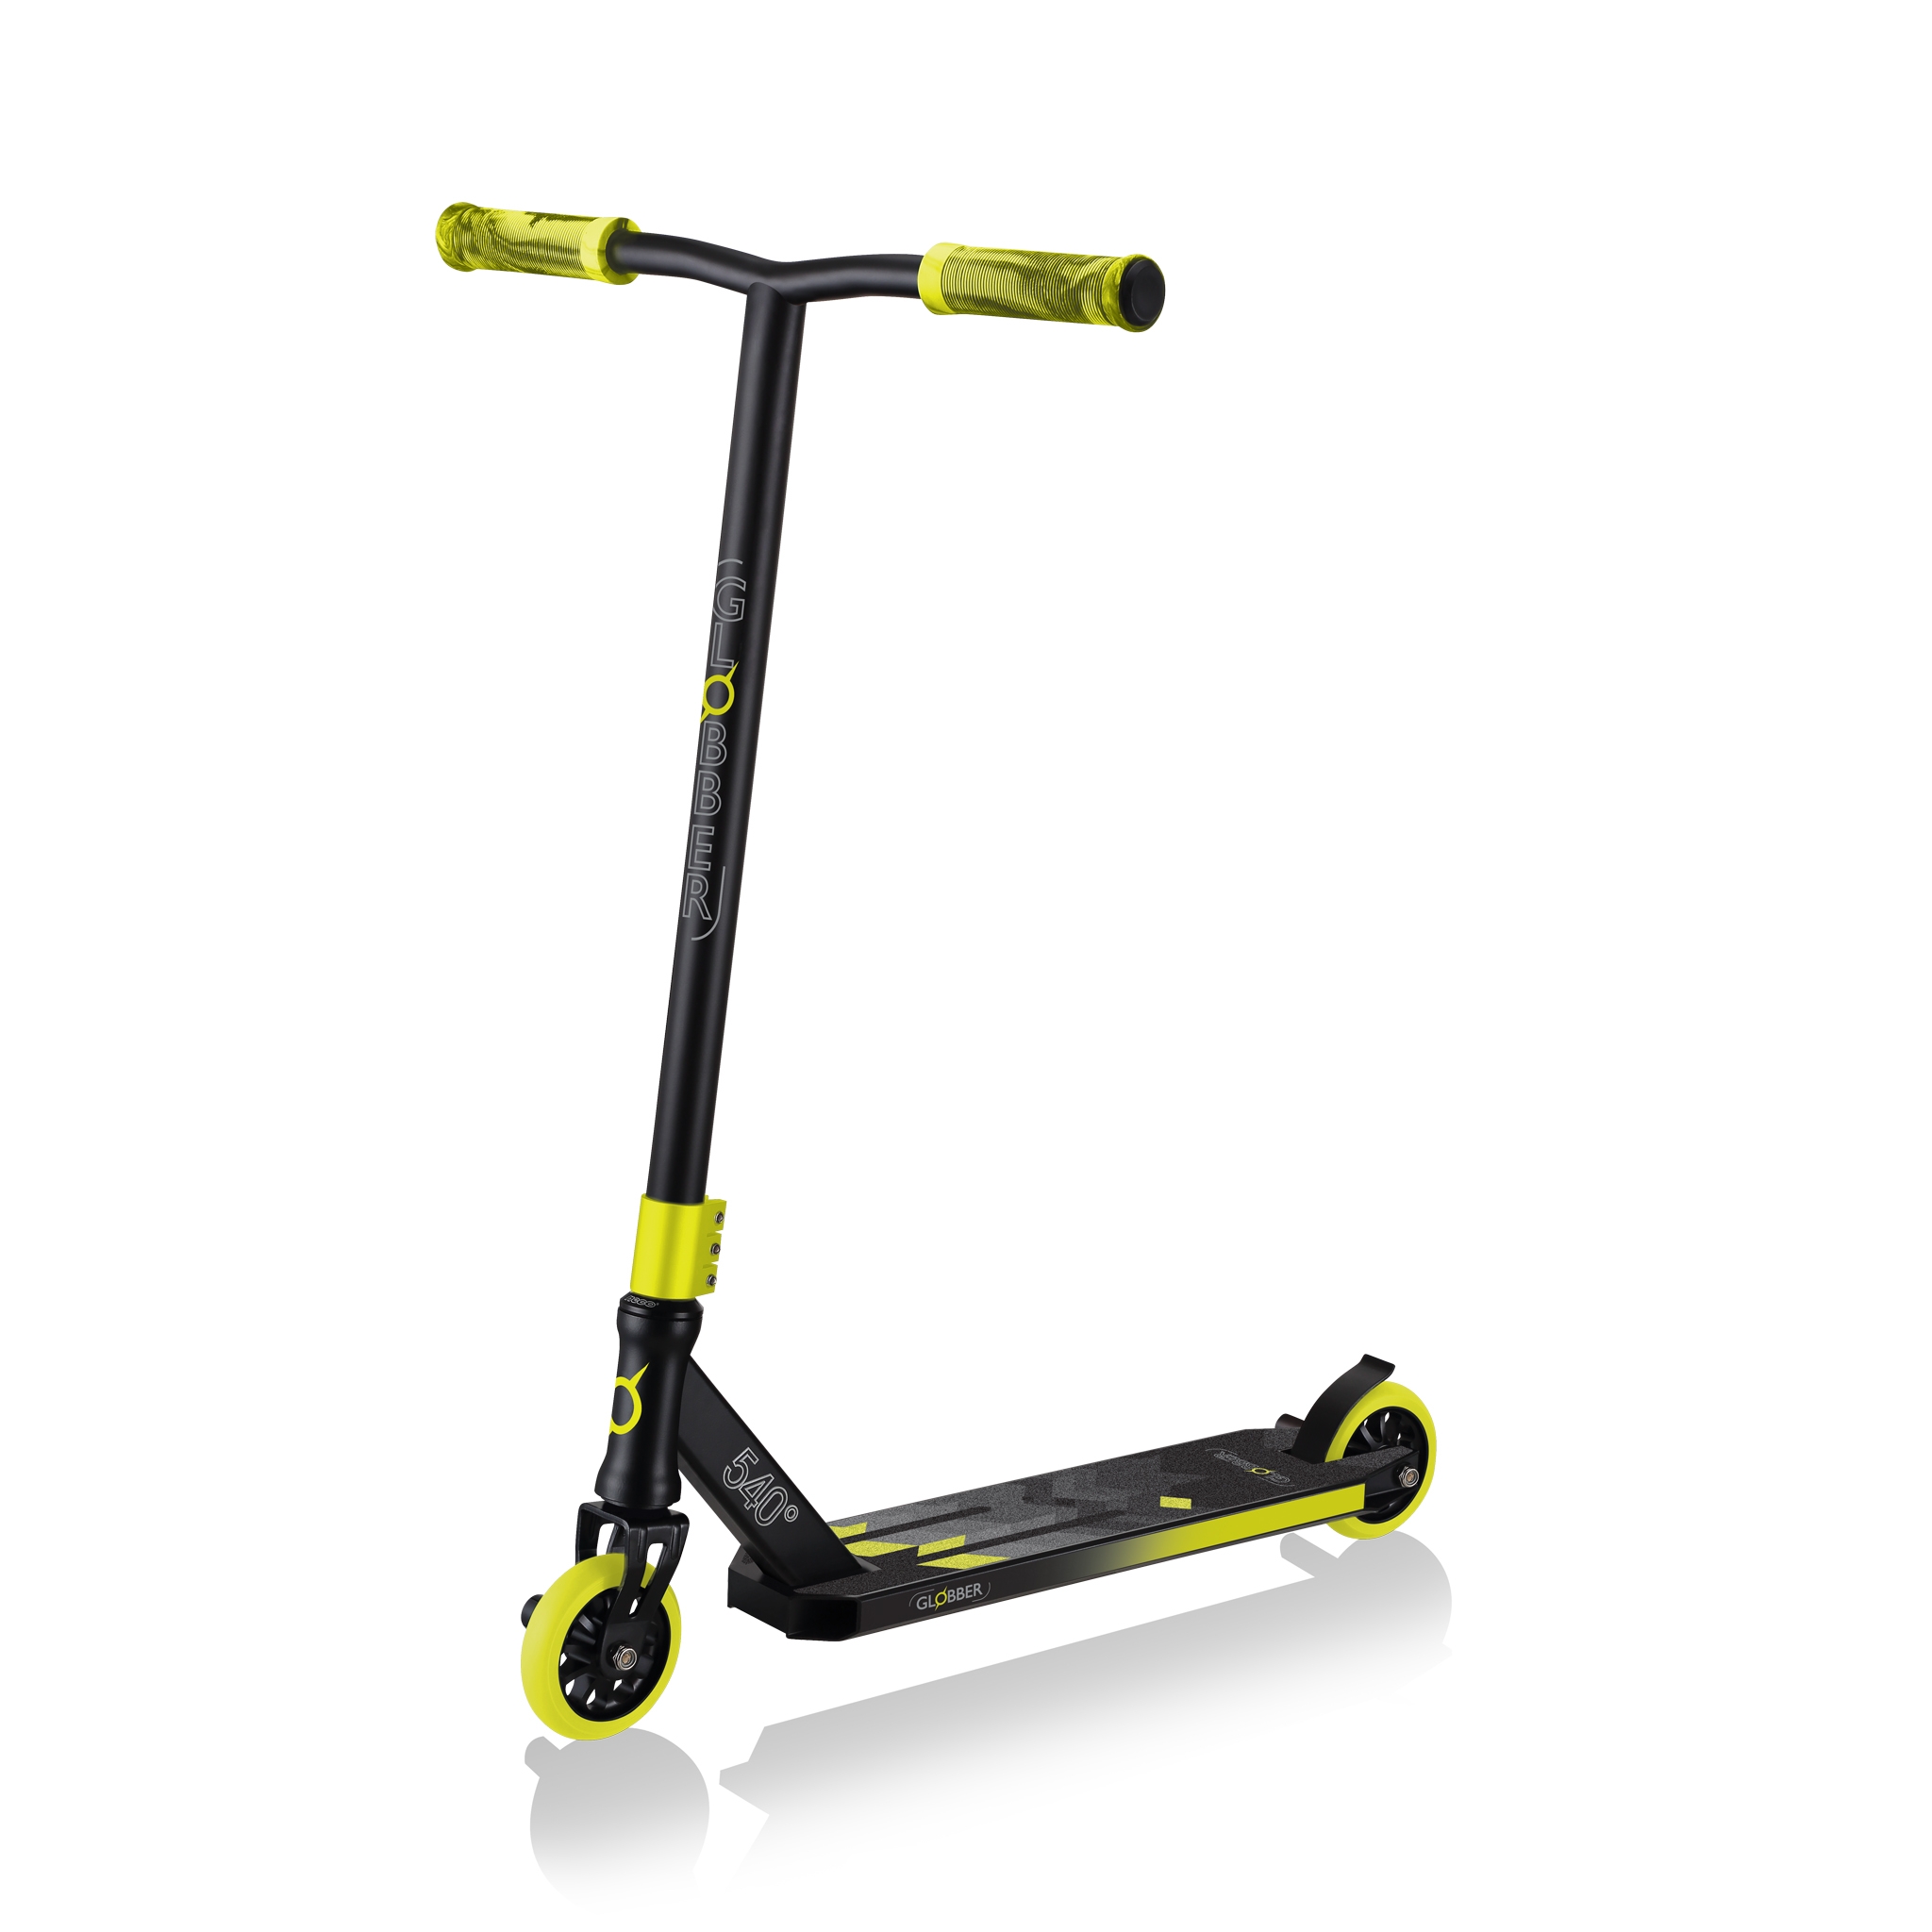 stunt-scooter-with-100mm-wheels-Globber-GS540 4